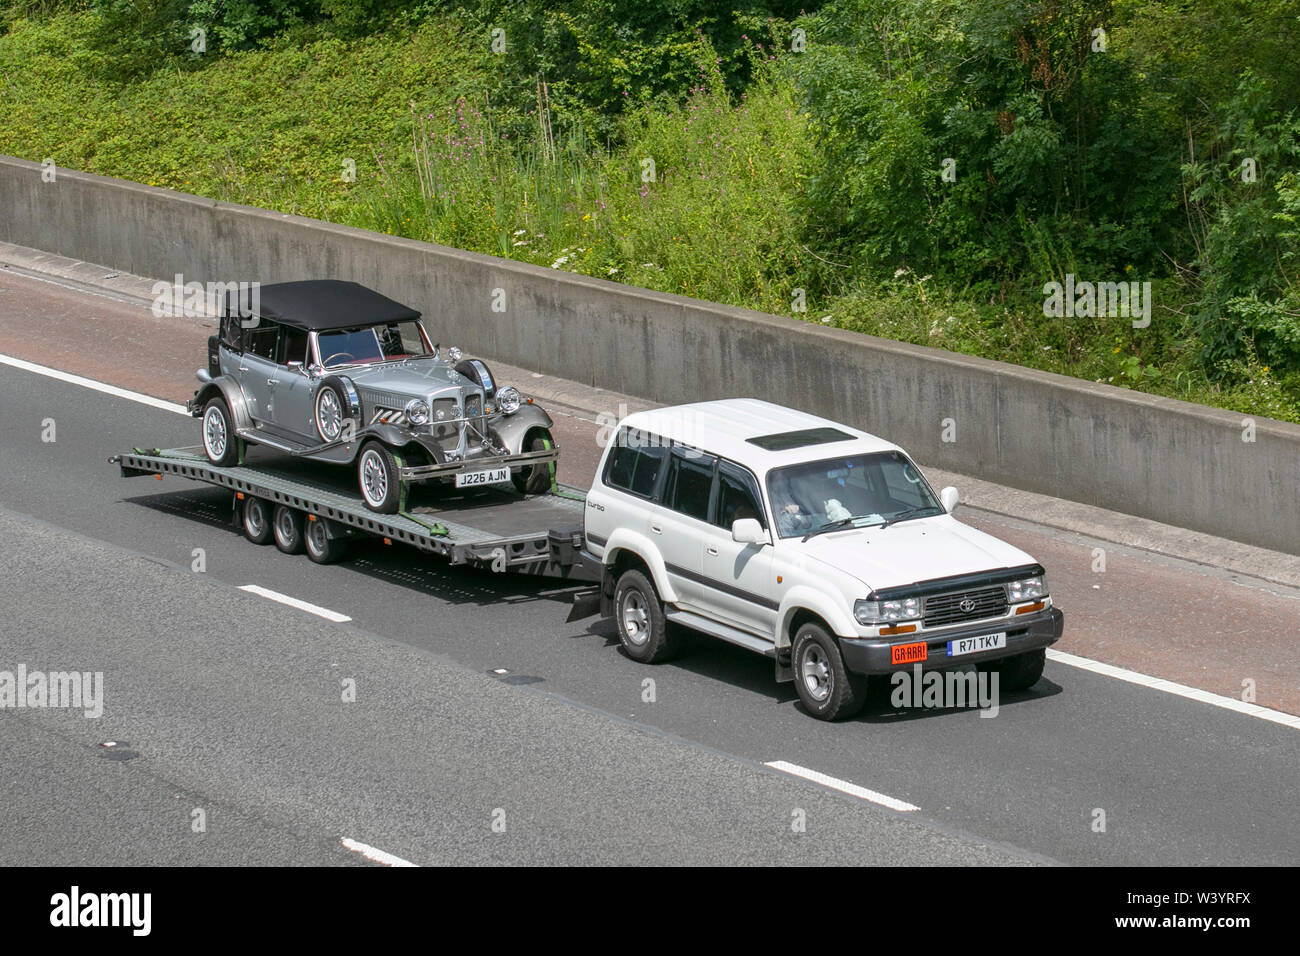 1992 90s silver Beauford being towed on a trailer by a 1997 Toyota  Landcruiser Amazon GX; UK Vehicular traffic, transport, modern, saloon cars,  south-bound on the 3 lane M6 motorway highway Stock